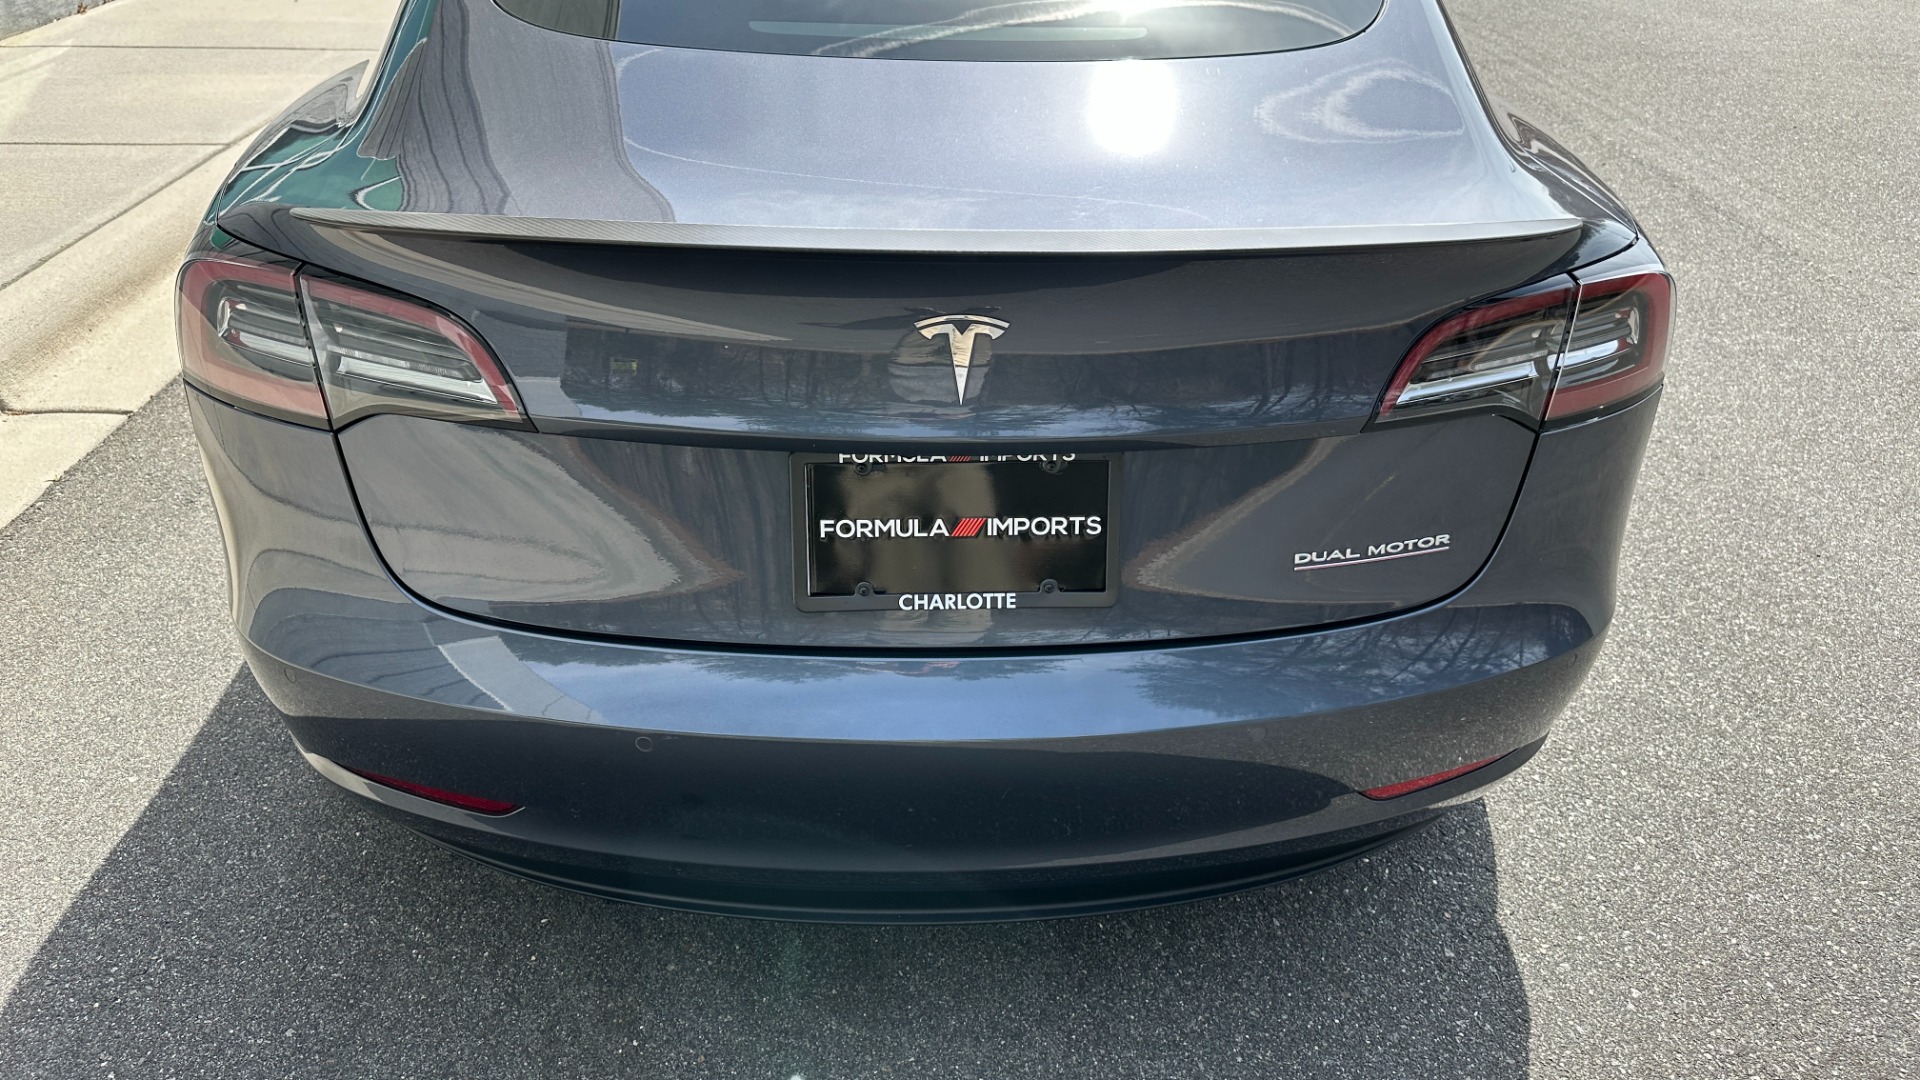 Used 2020 Tesla Model 3 PERFORMANCE / AWD / 20IN WHEELS / FULL SELF DRIVING / PREMIUM CONNECTIVITY for sale Sold at Formula Imports in Charlotte NC 28227 5